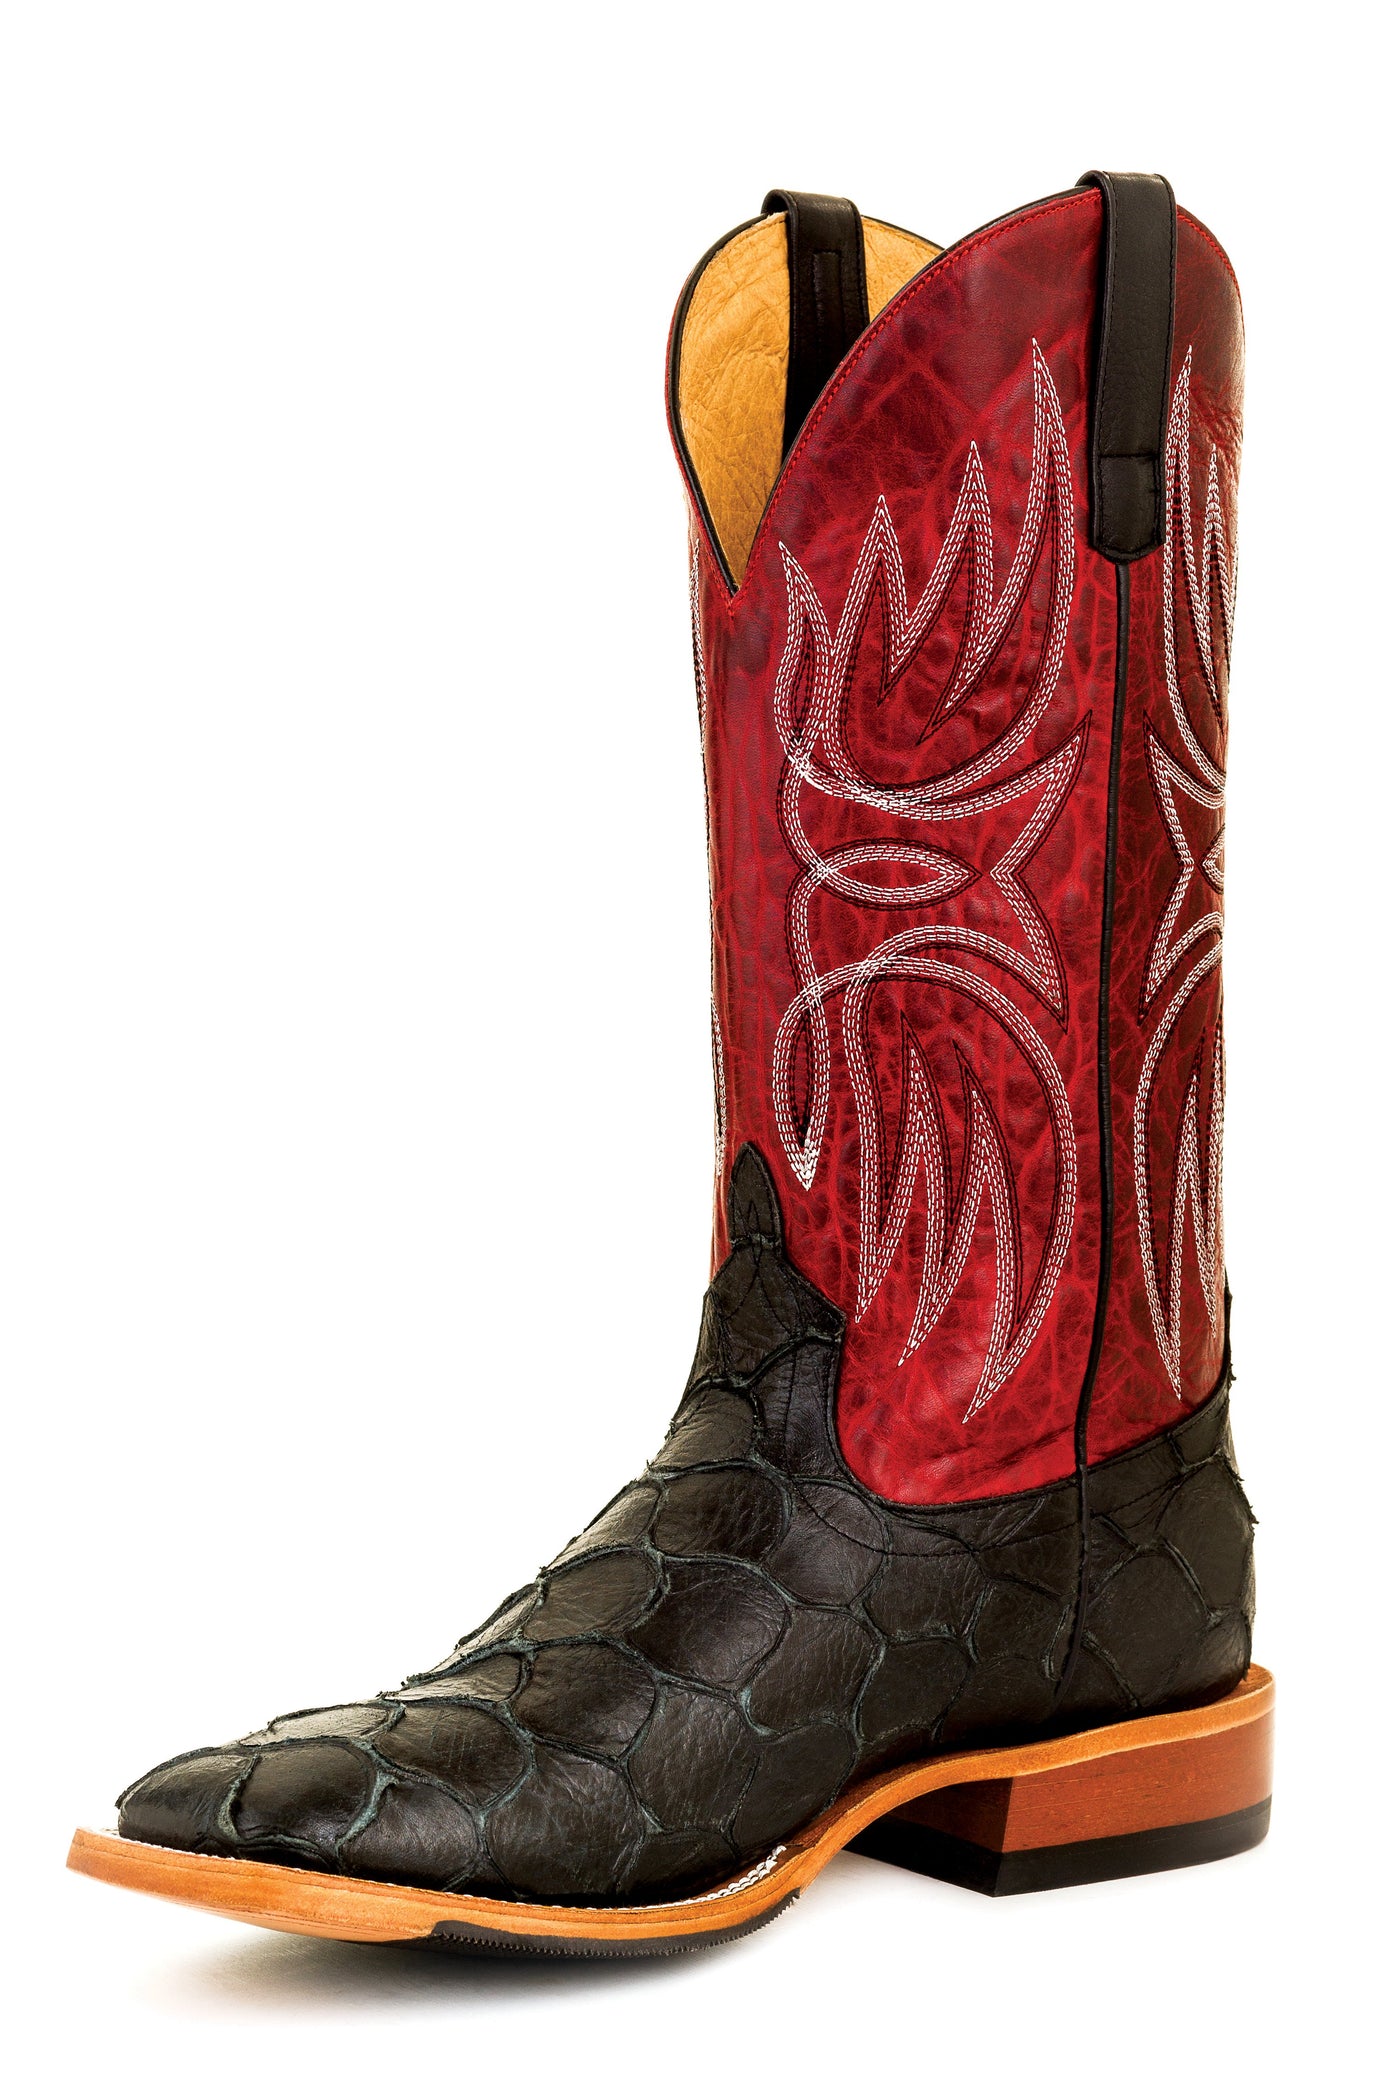 these boots are gucci